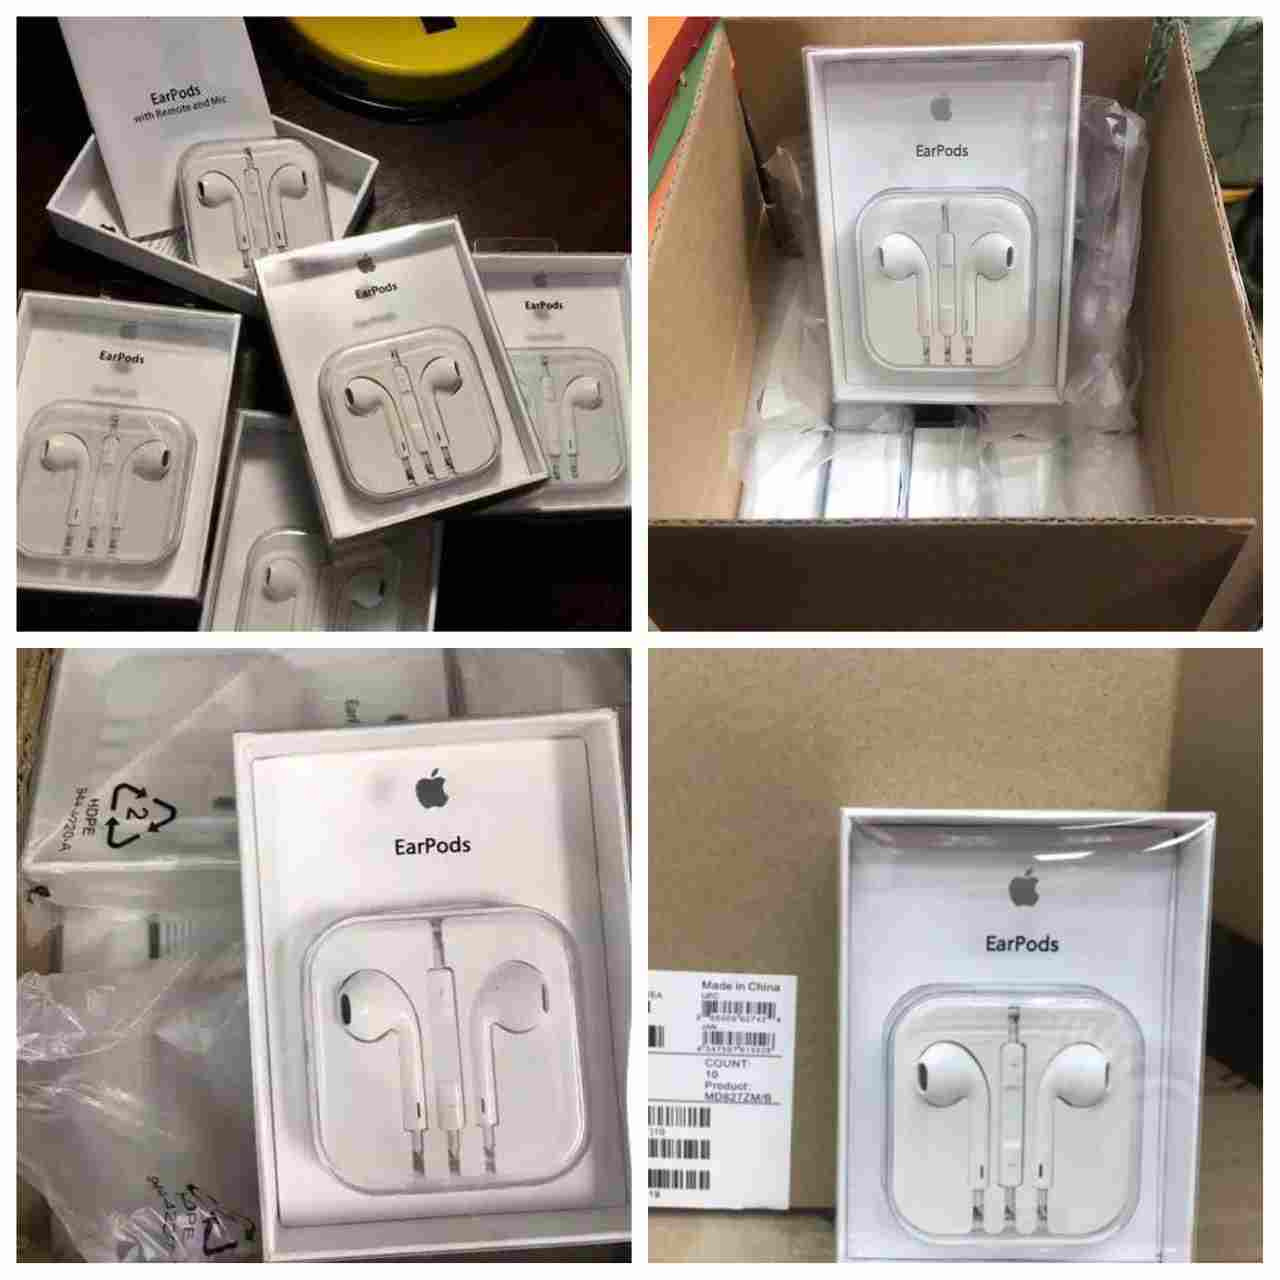 Iphone 6g Stereo Sound Iphone Earphone Bd